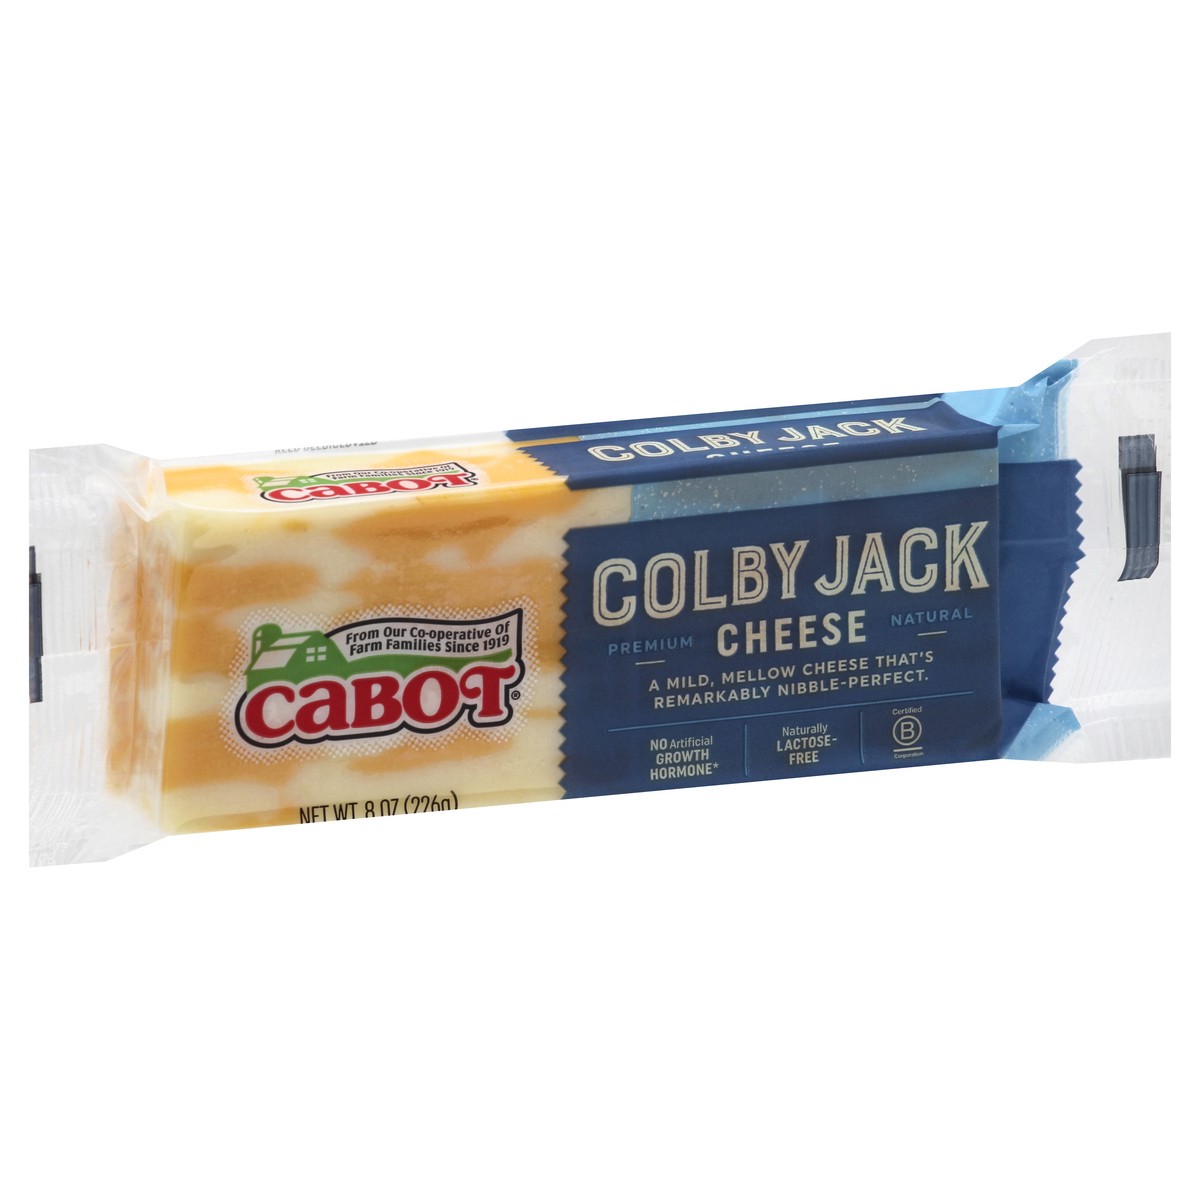 slide 5 of 10, Cabot Creamery Bar Colby Jack Cheddar Cheese 8 oz, 8 oz